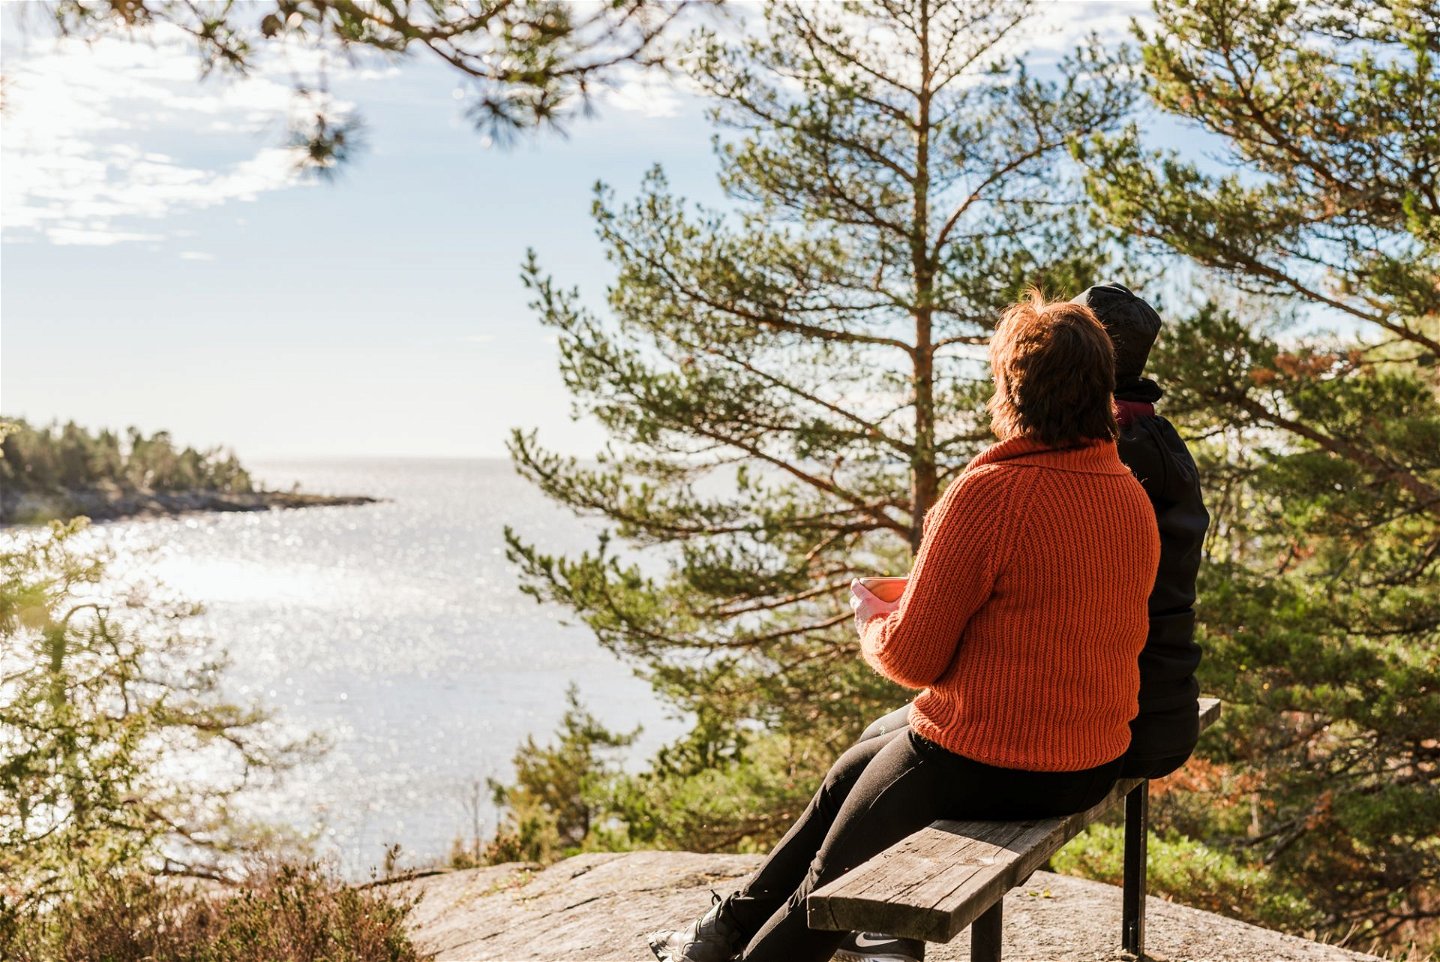 Break for coffee, the hikers sit on a bench and look out over Lake Vänern